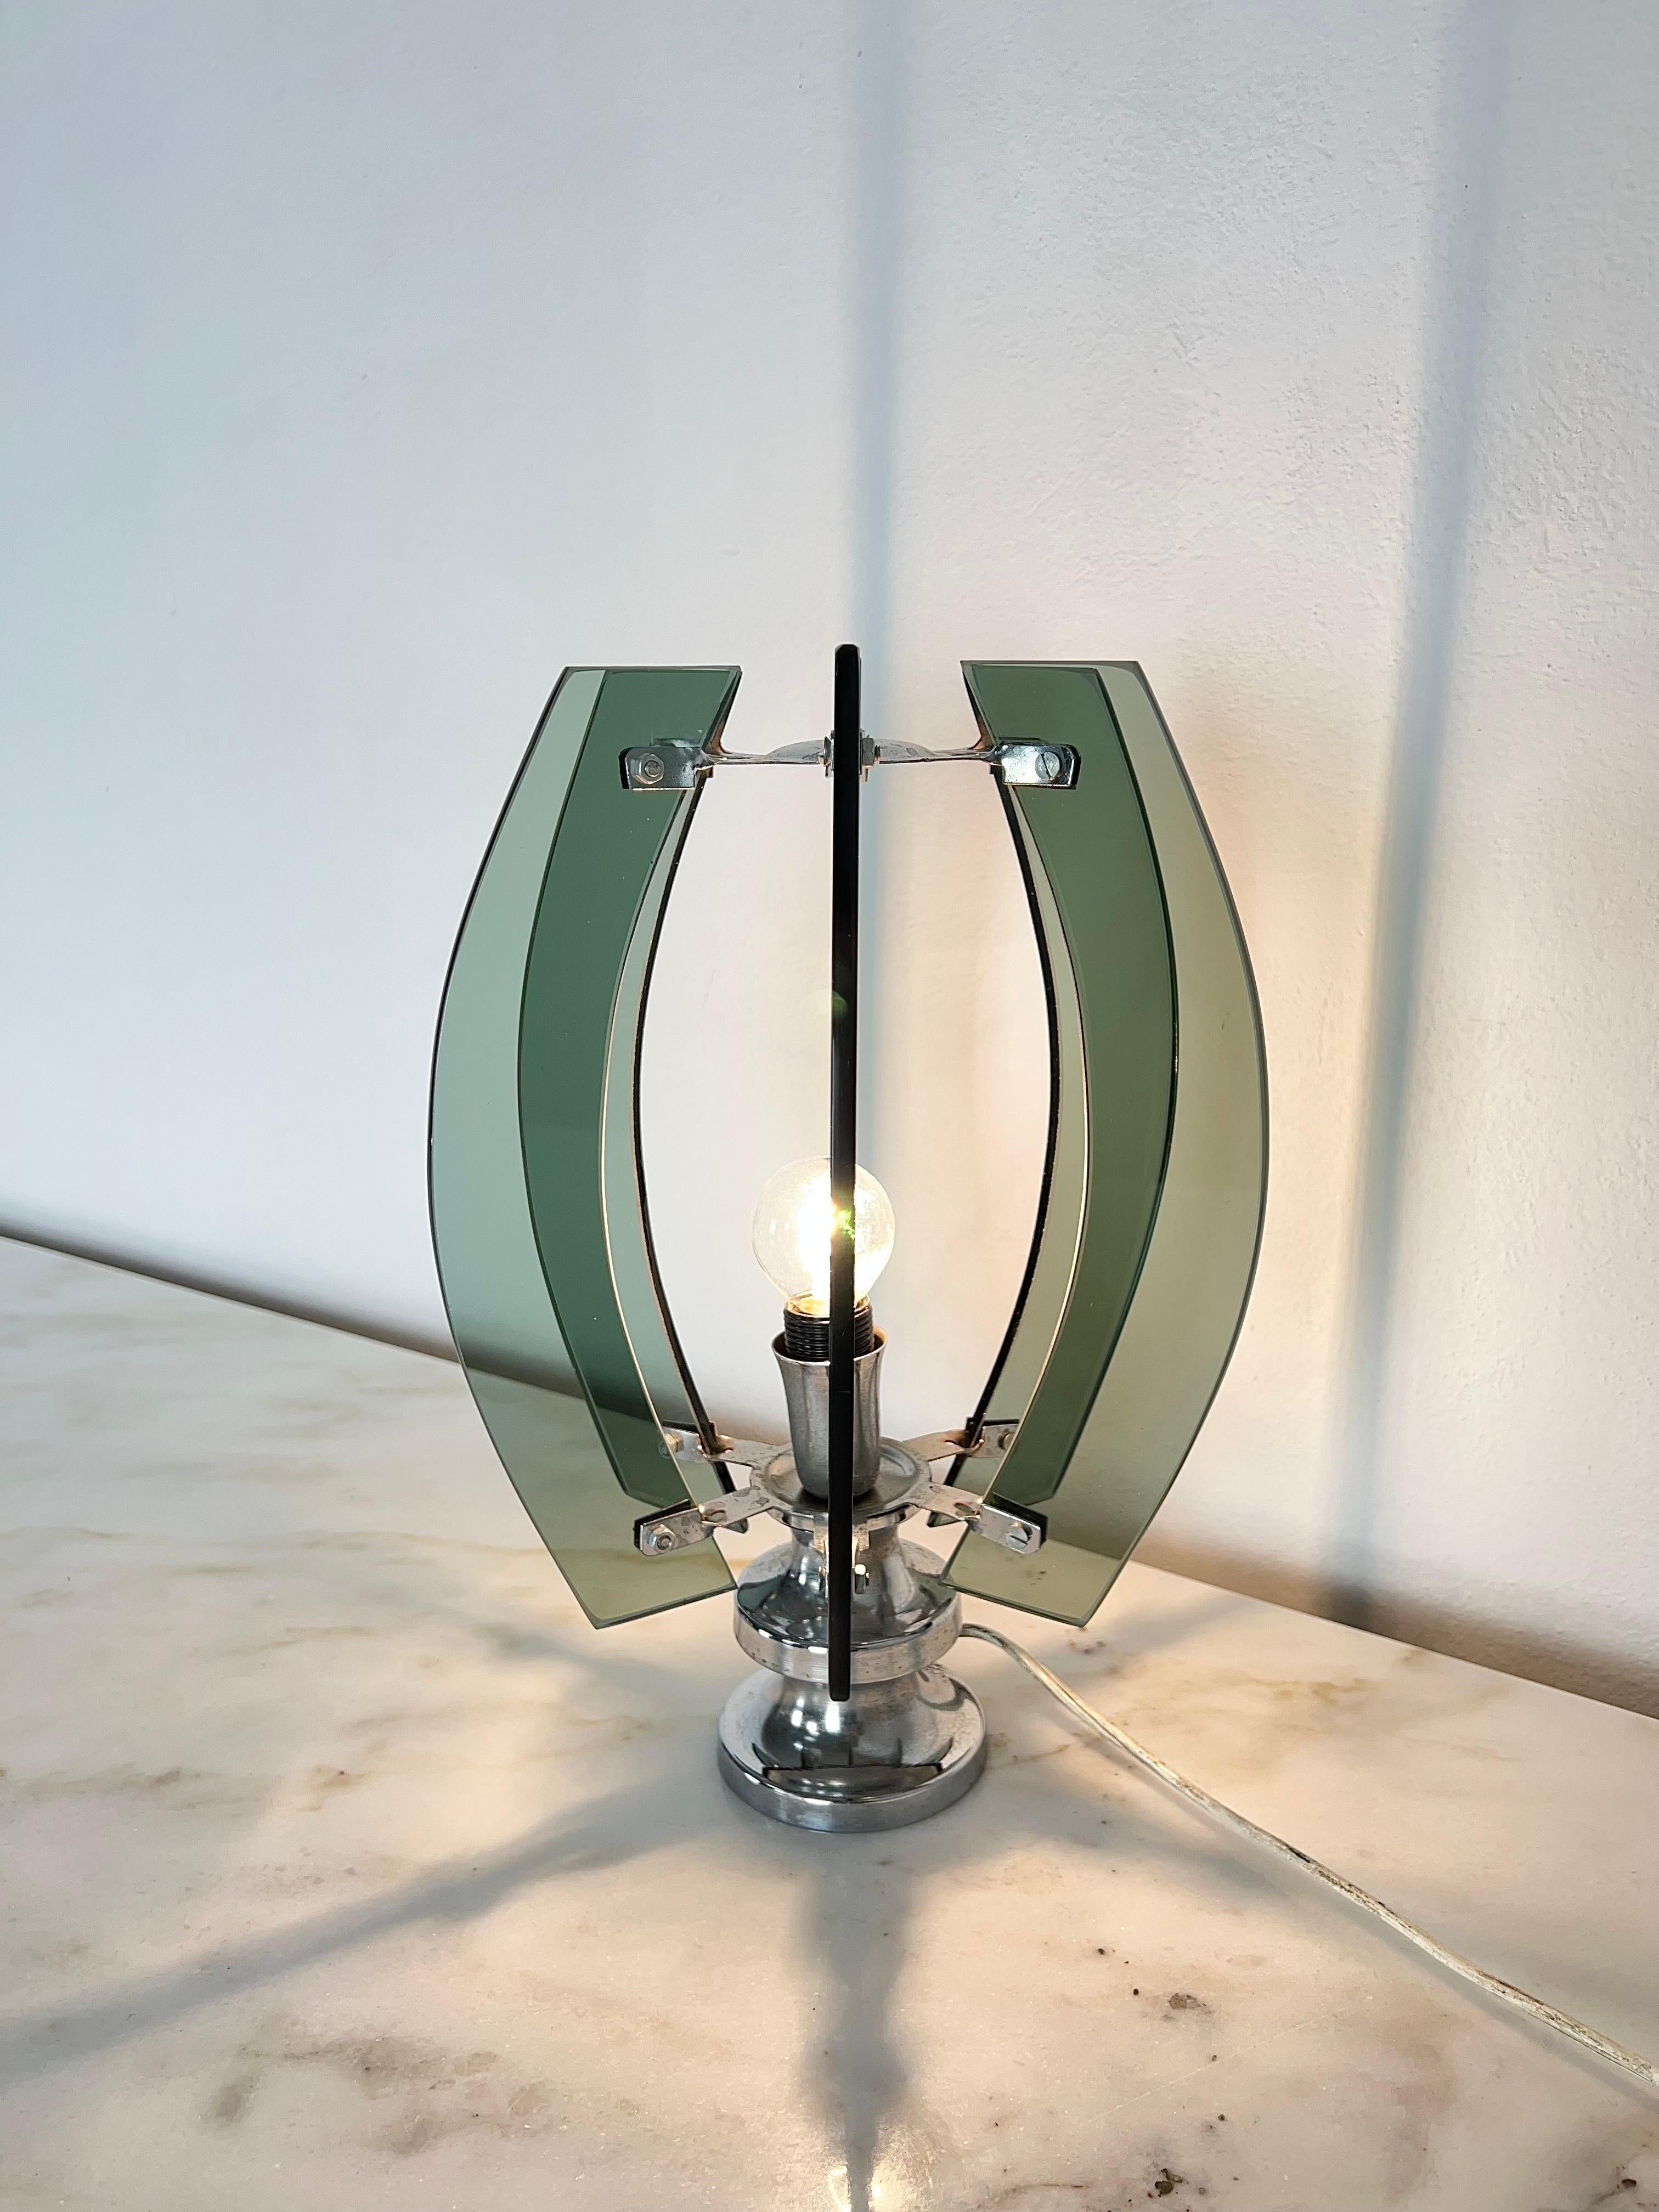 20th Century Table Lamp Smoked Glass Chromed Metal Midcentury Italian Design 1970s For Sale